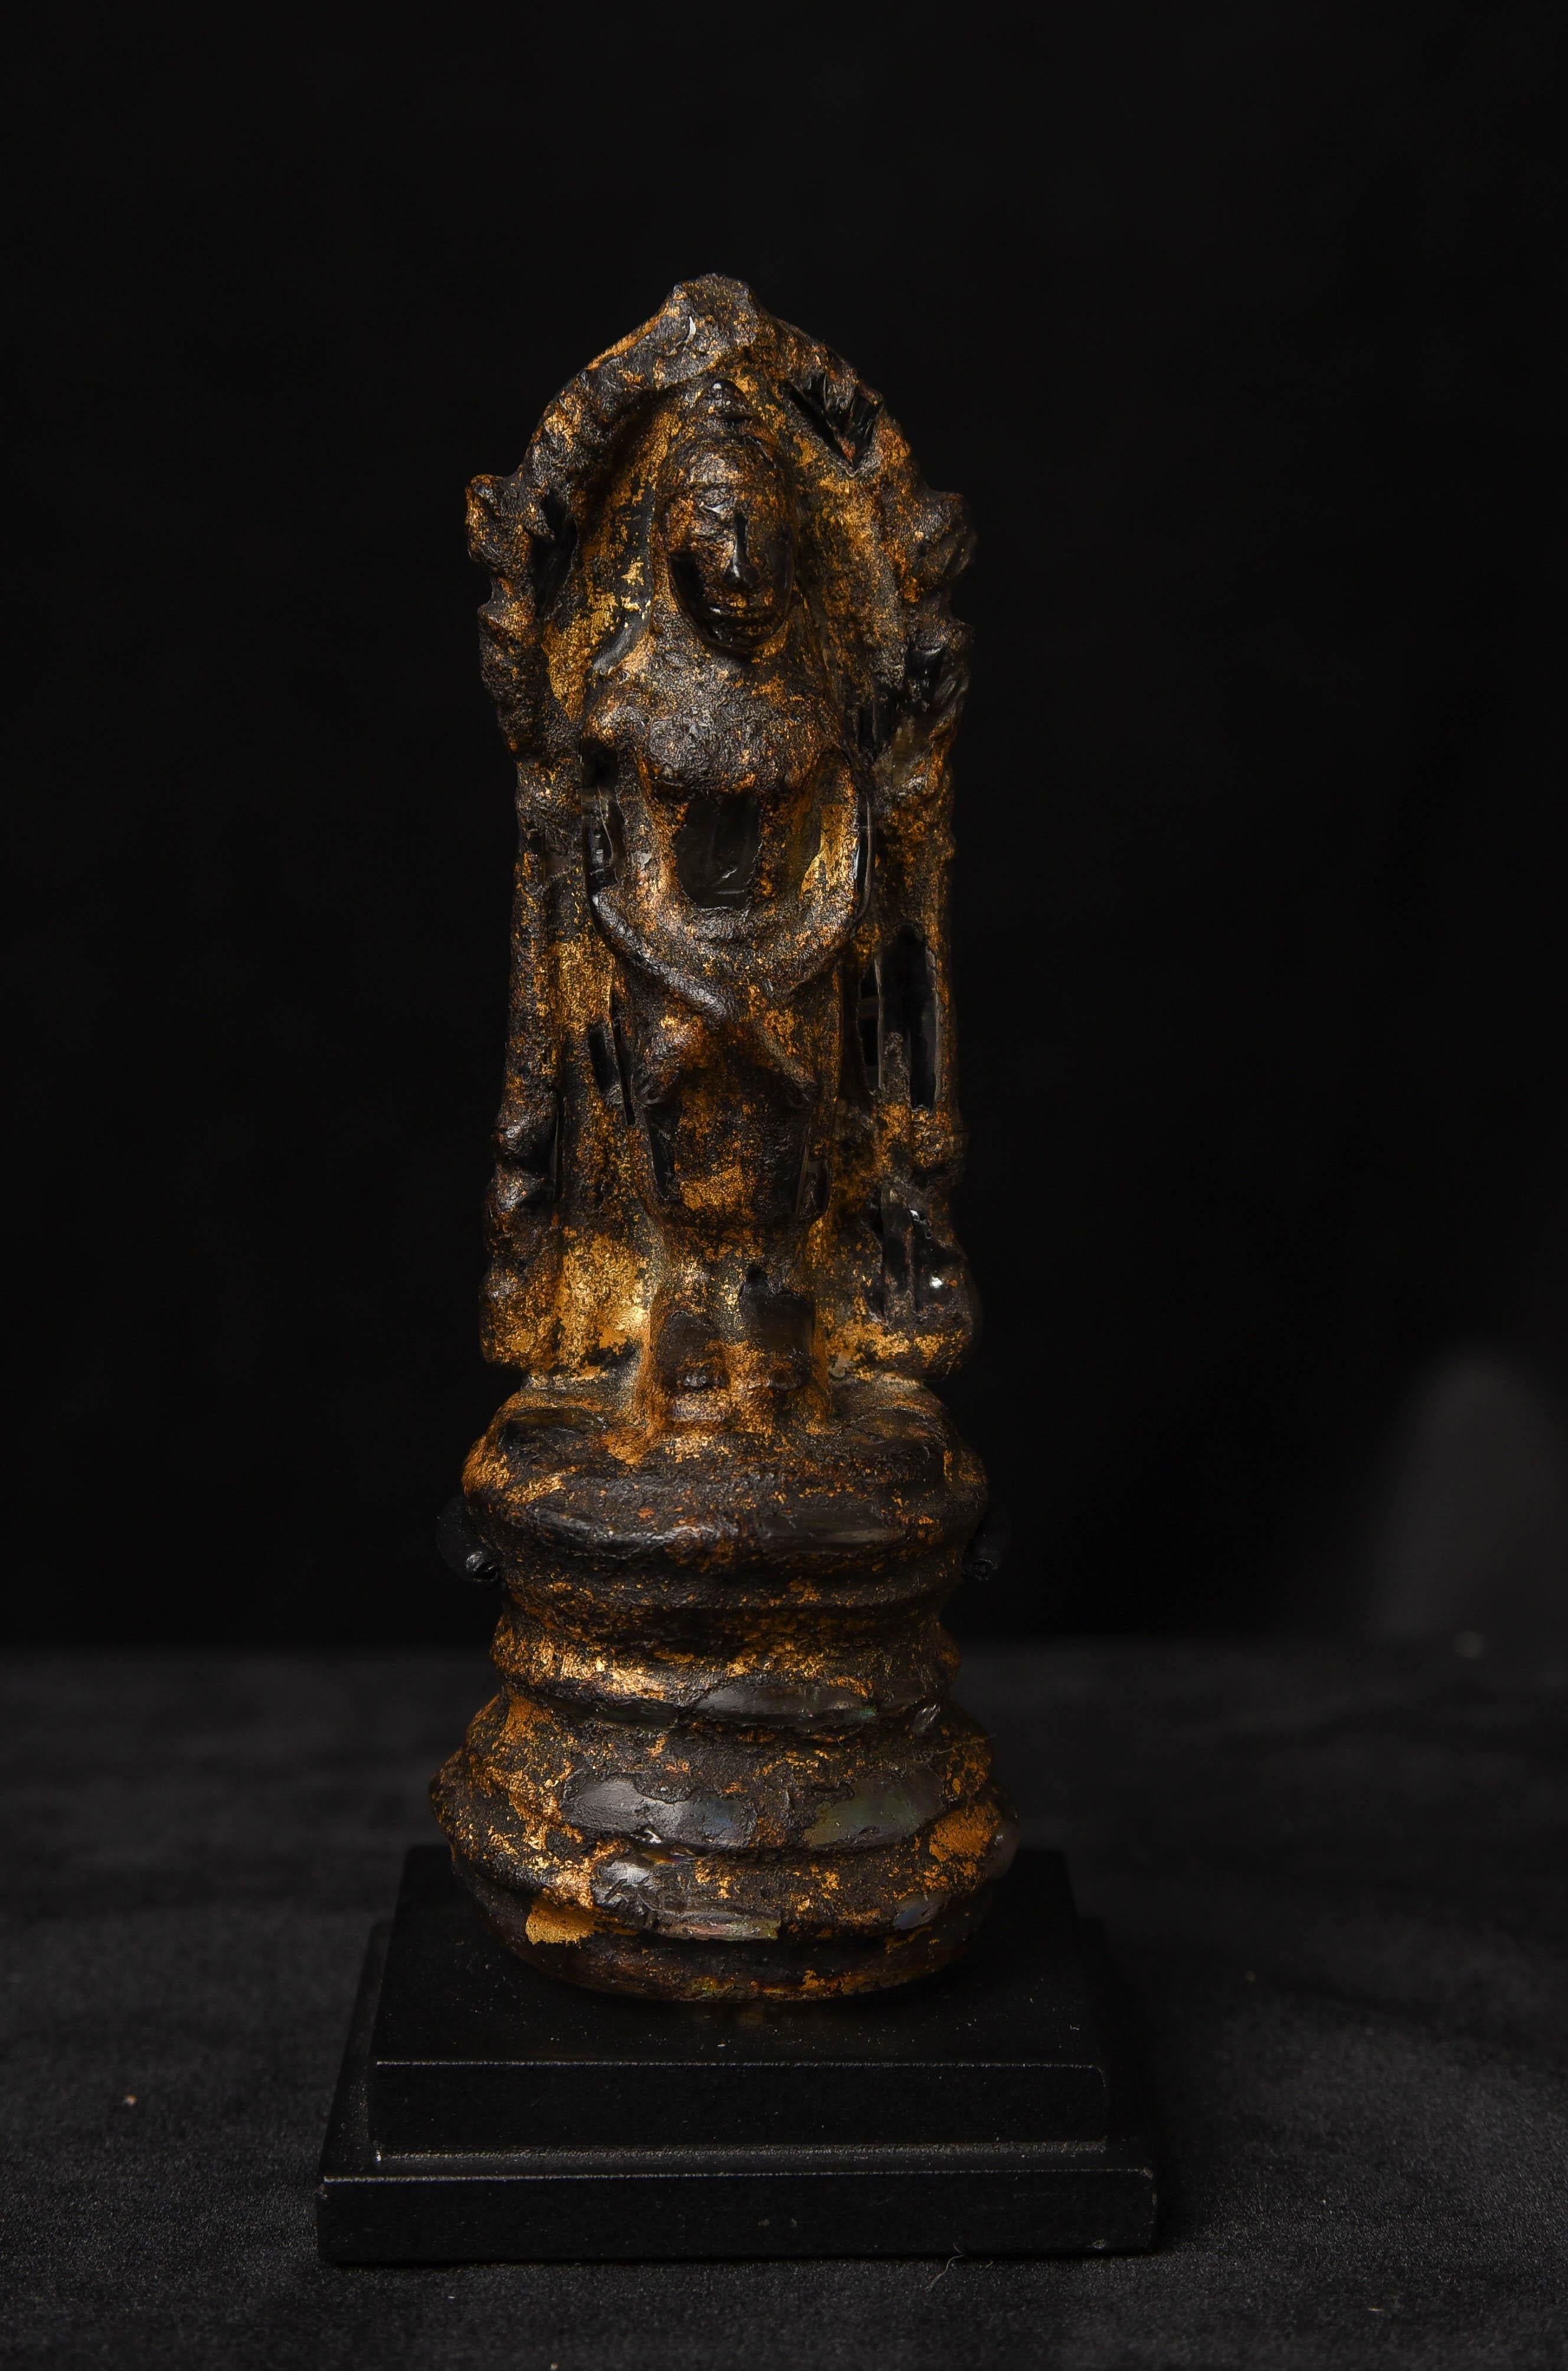 Rare 17thC or earlier Thai or Laos crystal Buddha with the original lacquer and gilding. Some wear and loss as seen in the photos. I've never seen another with an original surface like this. Very powerful piece. Could use a stand. Height: 4.75